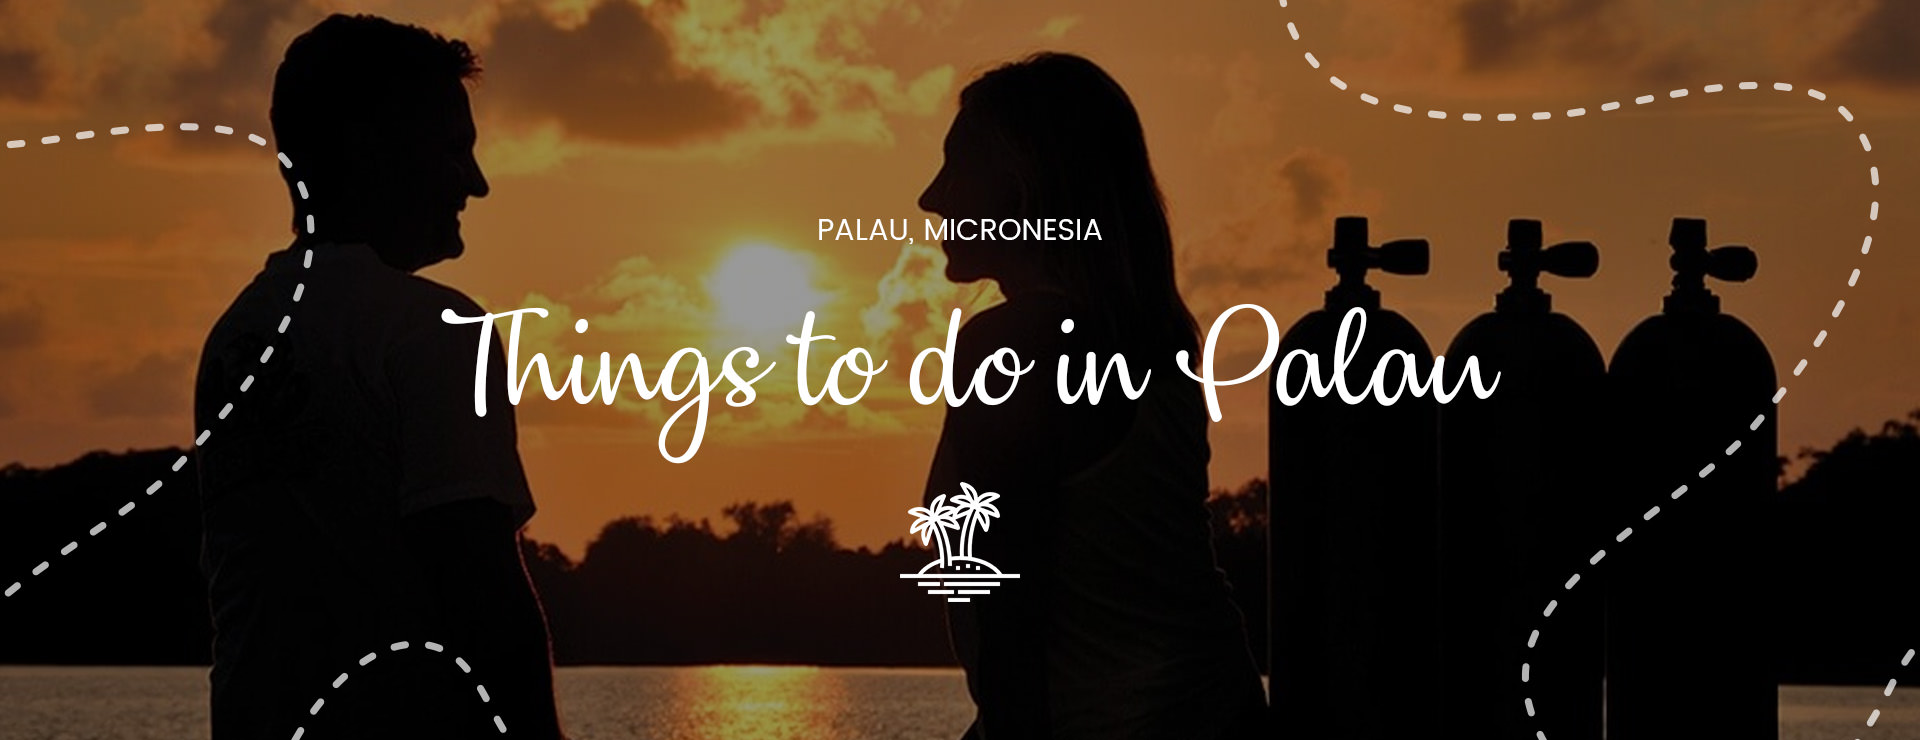 Things to do in Palau